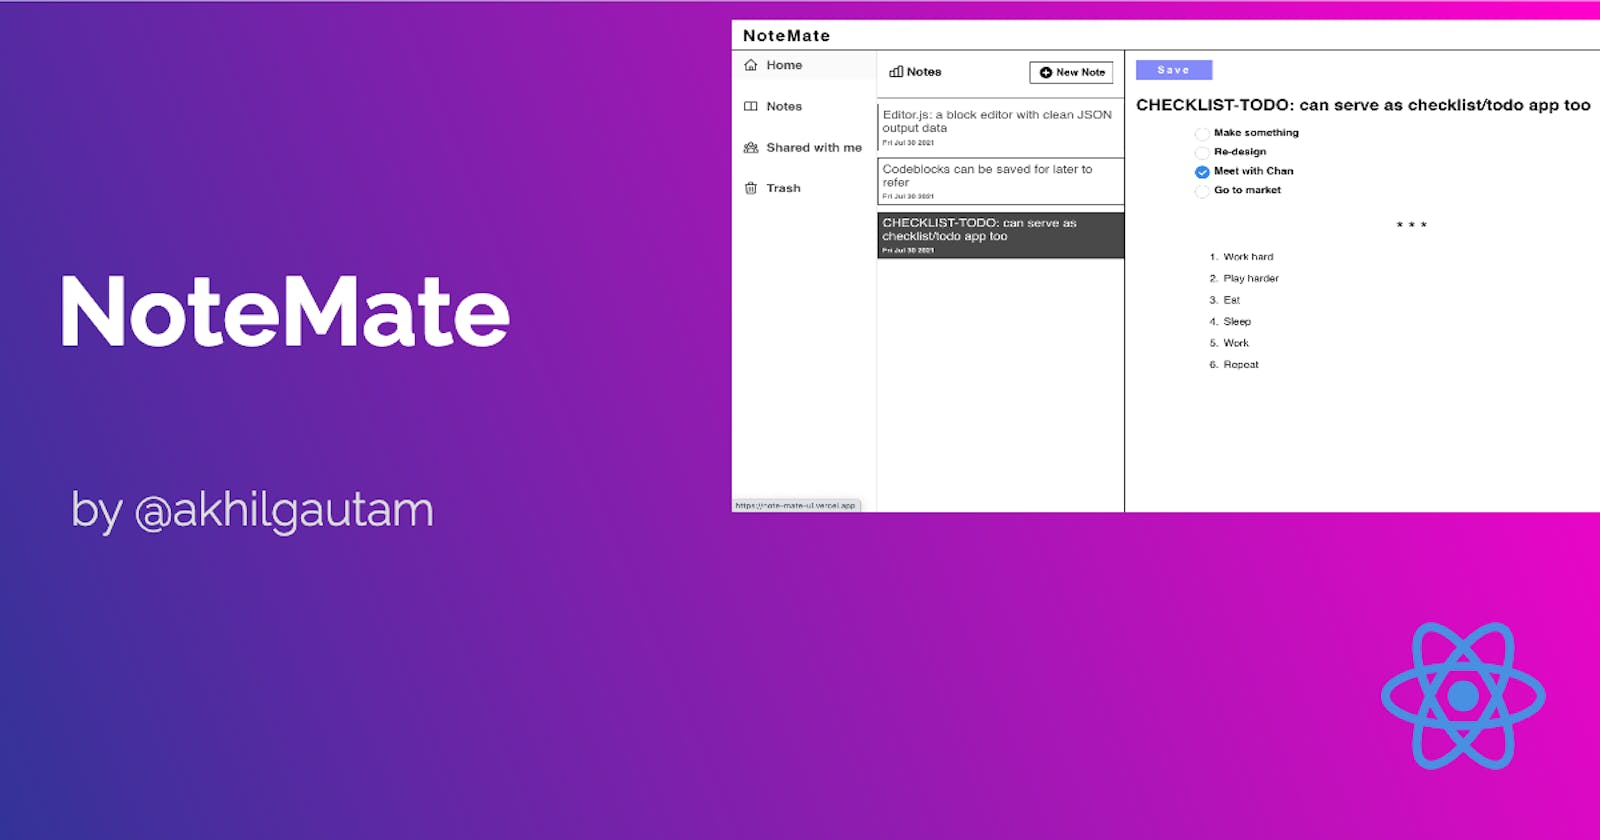 Introducing NoteMate - not just a note taking app, more than that